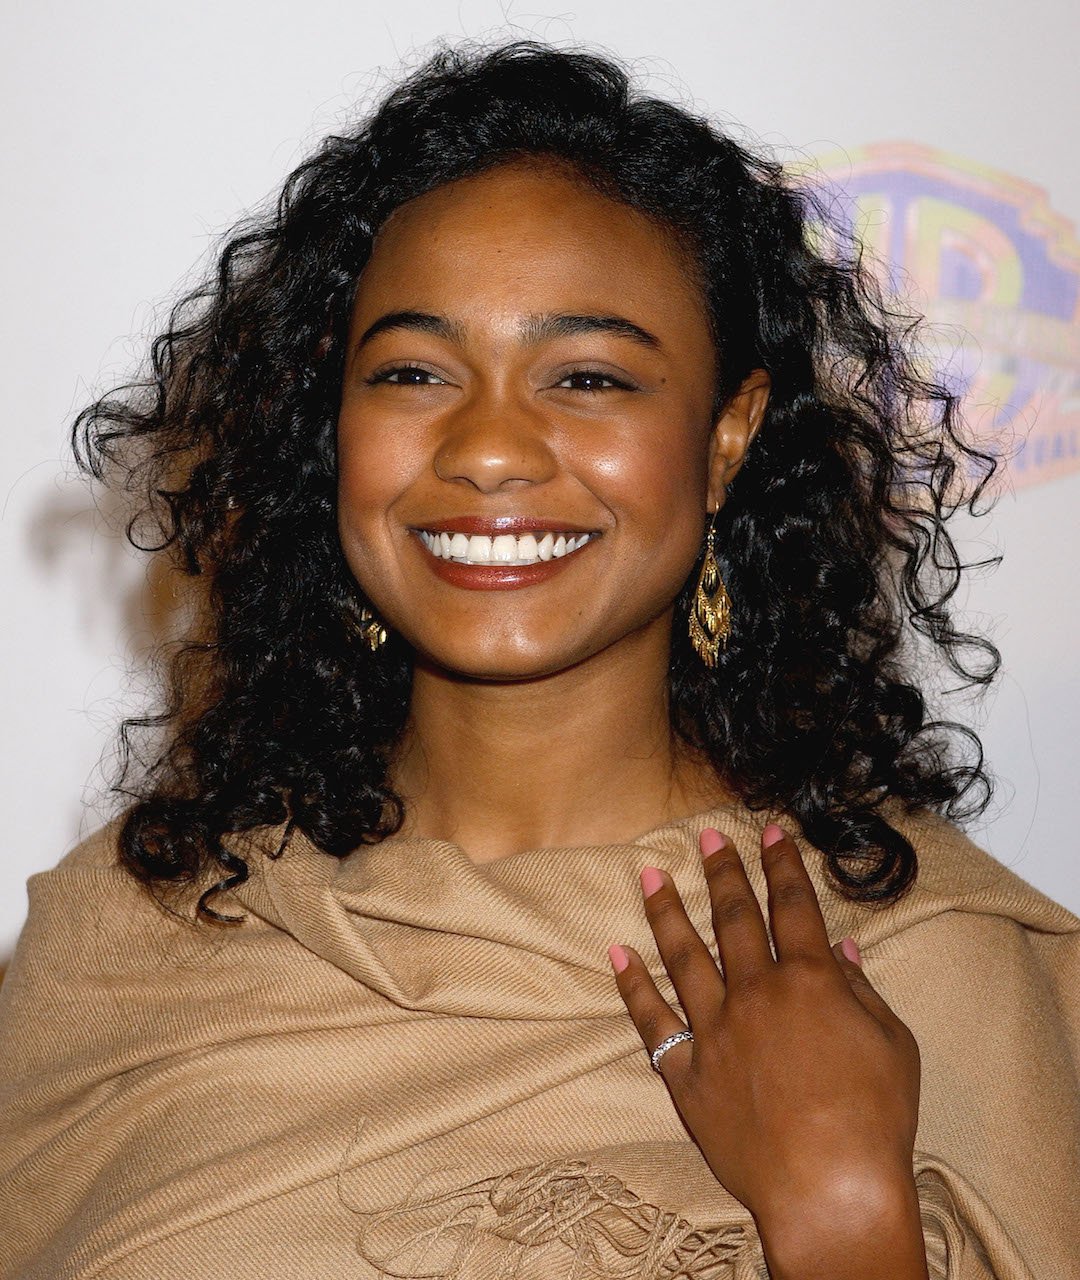 Tatyana Ali smiles on red carpet; Ali competed on 'RuPaul's Drag Race'